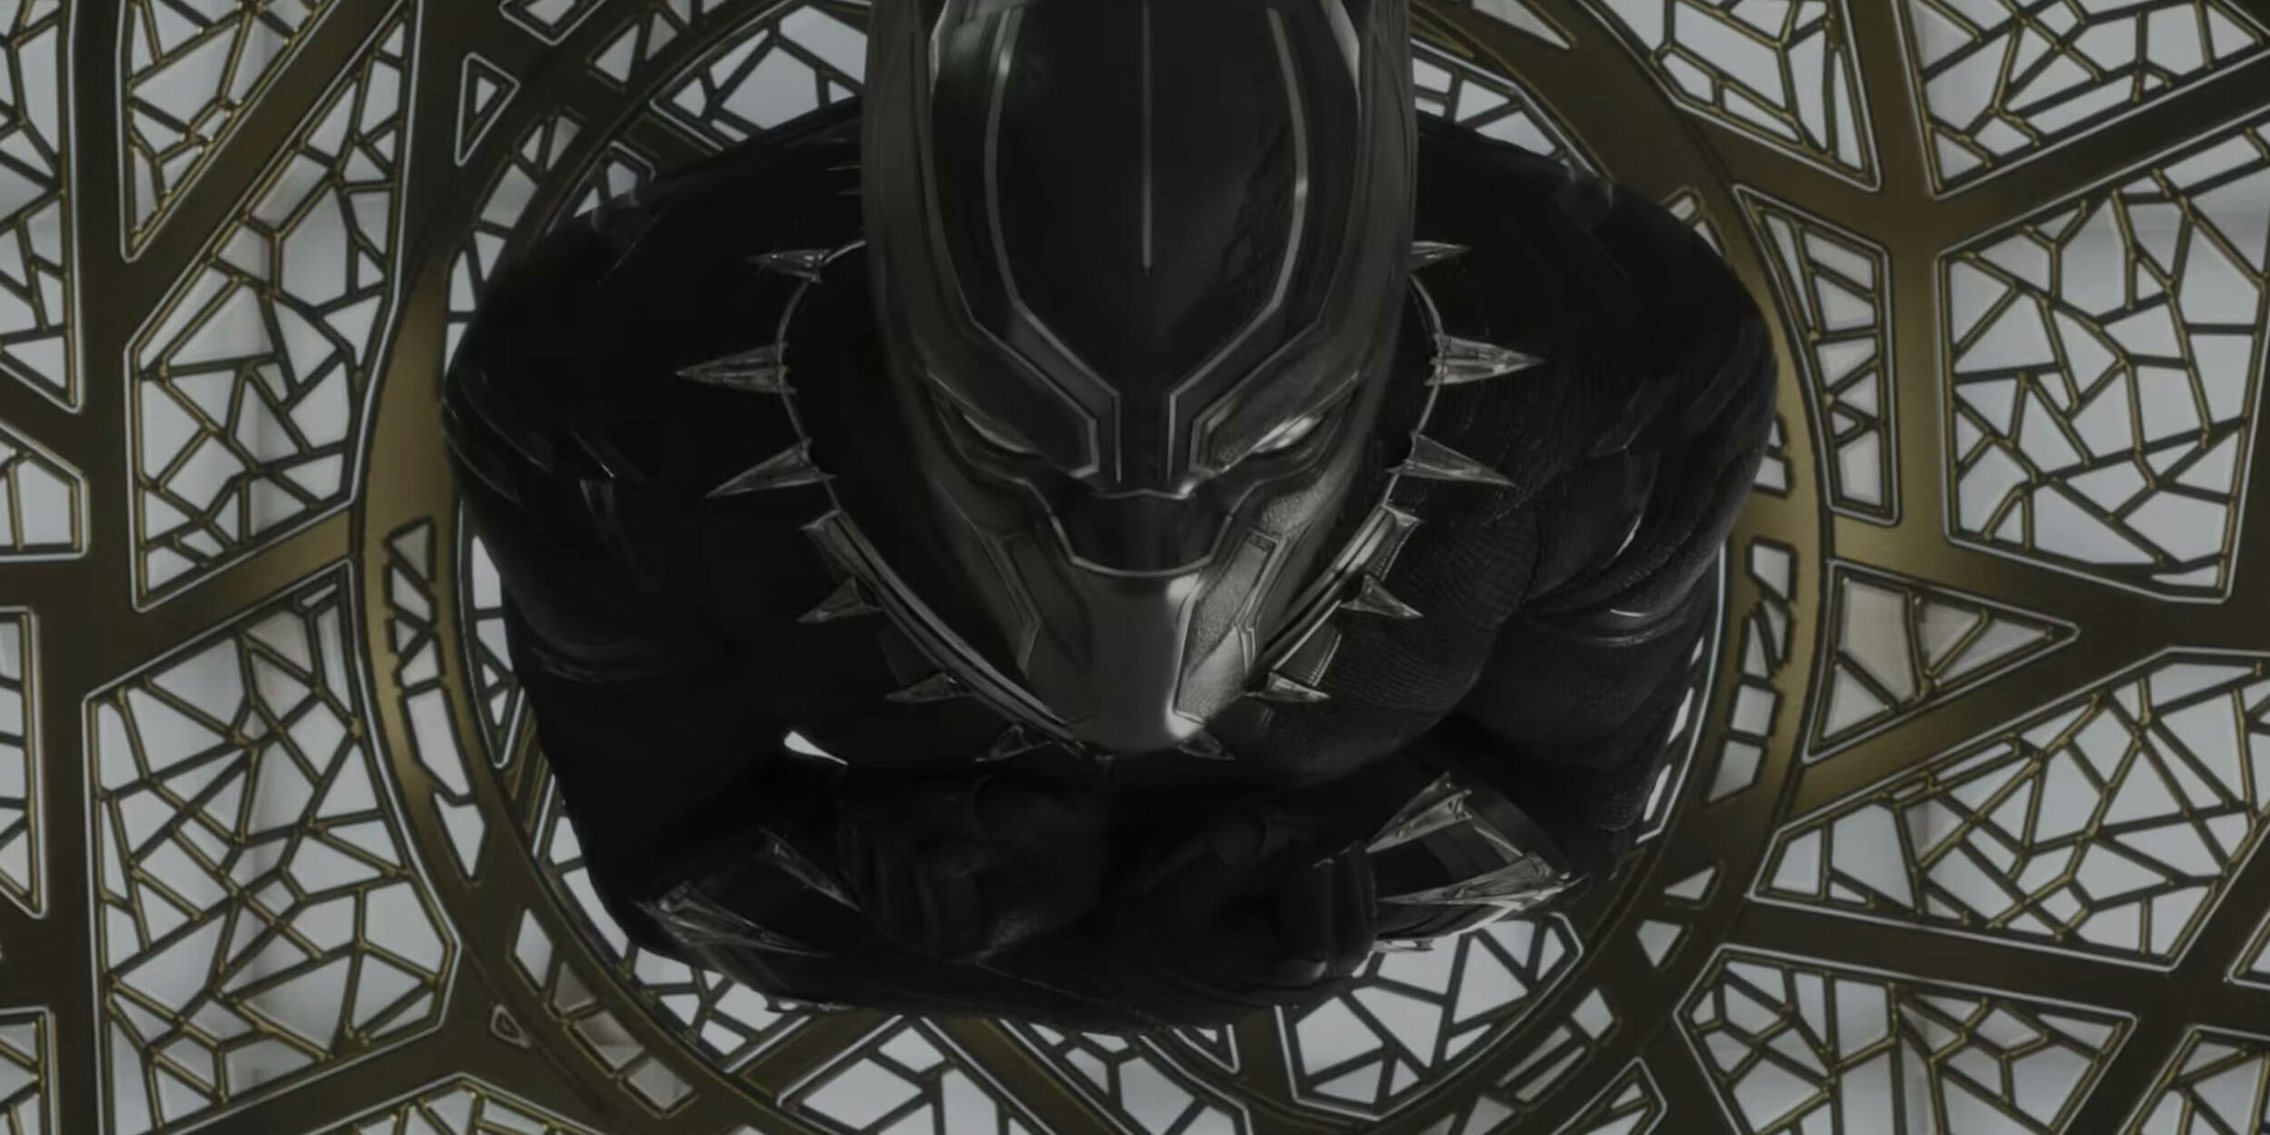 Black Marvel Characters - Black Panther looking up at the camera